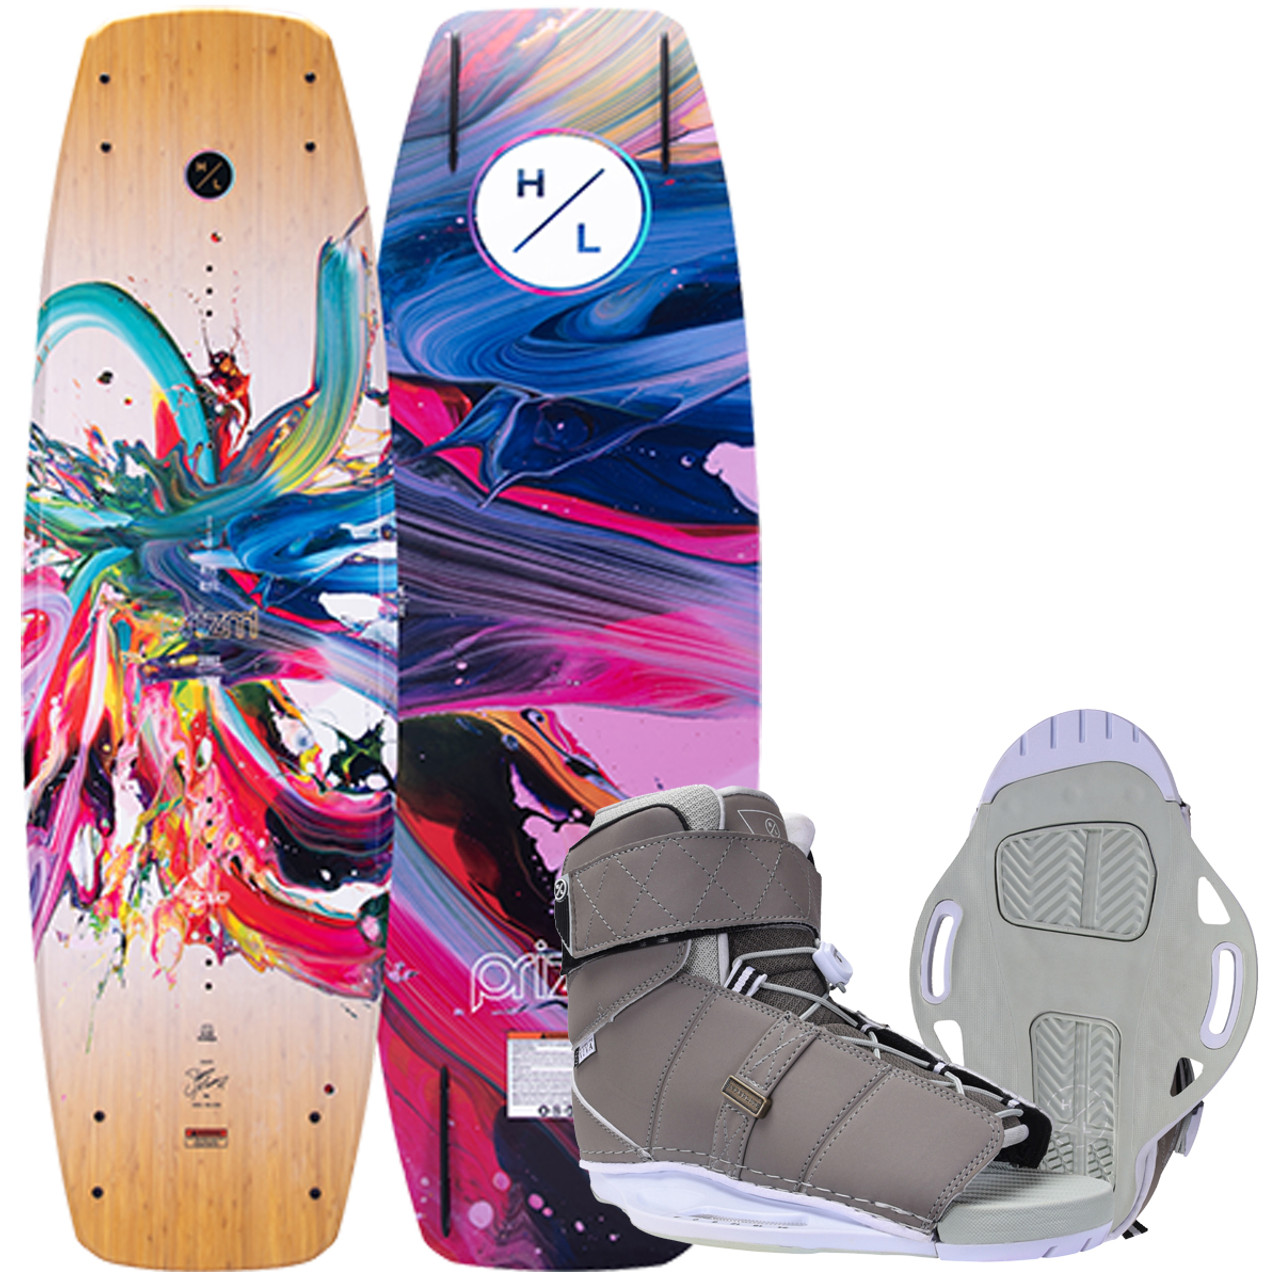 Hyperlite Prizm 134 cm Women's Wakeboard Package with Viva Boots